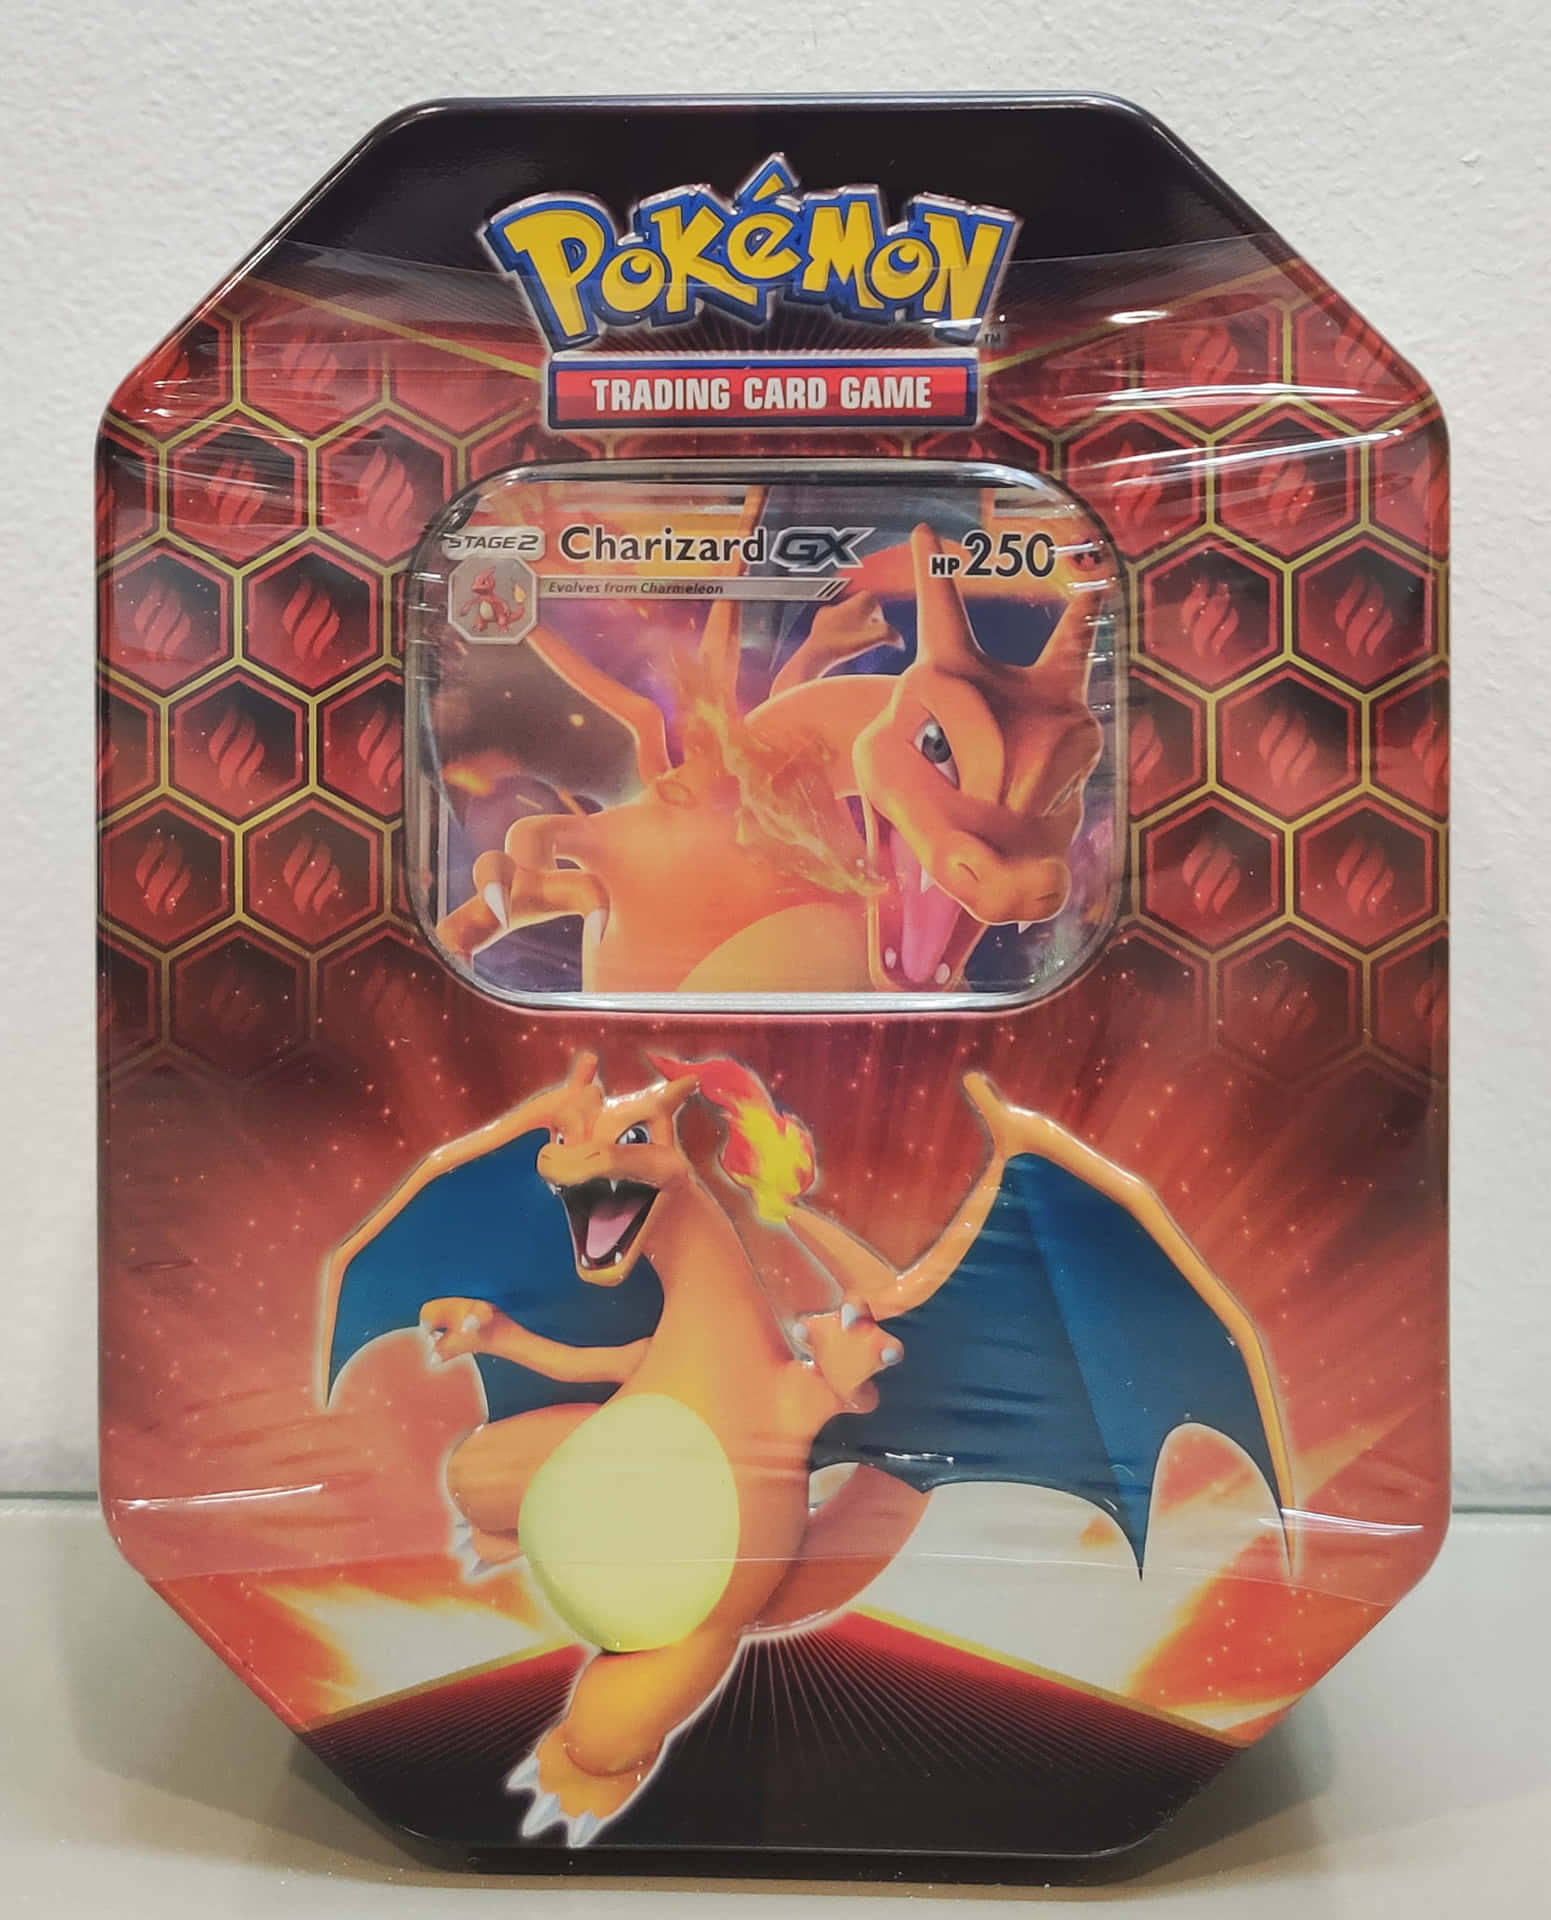 Charizard is one of the most popular and iconic Pokémon from the first generation.